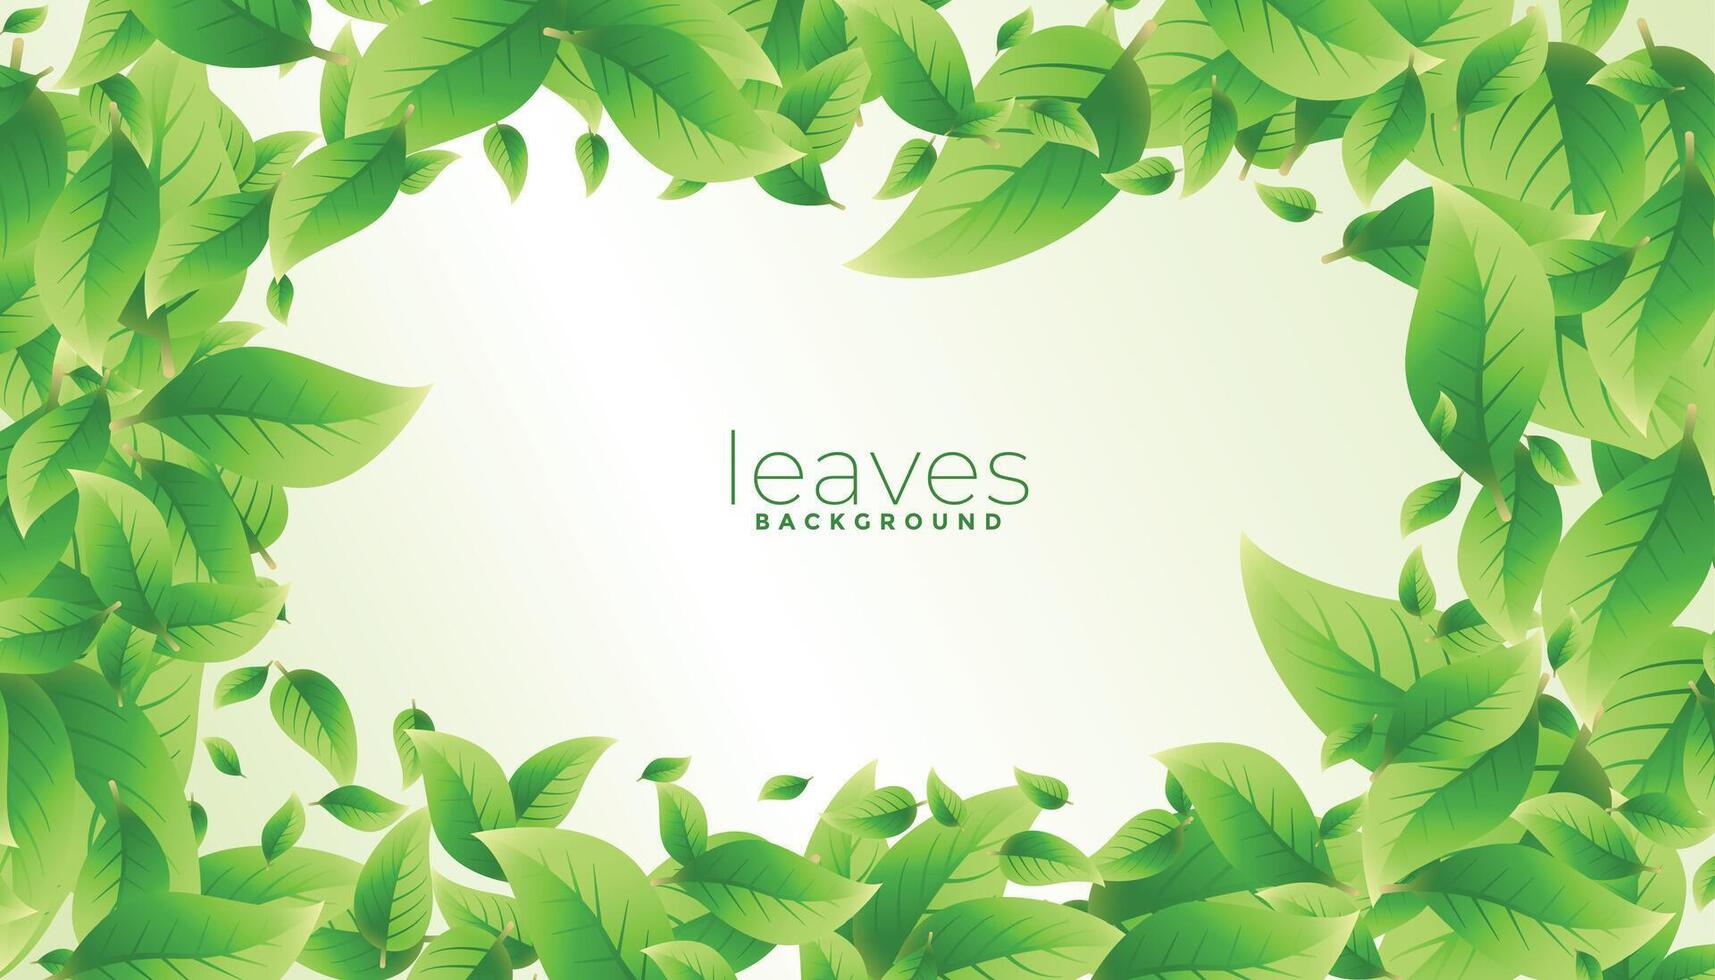 organic and fresh greenery leaves background design vector